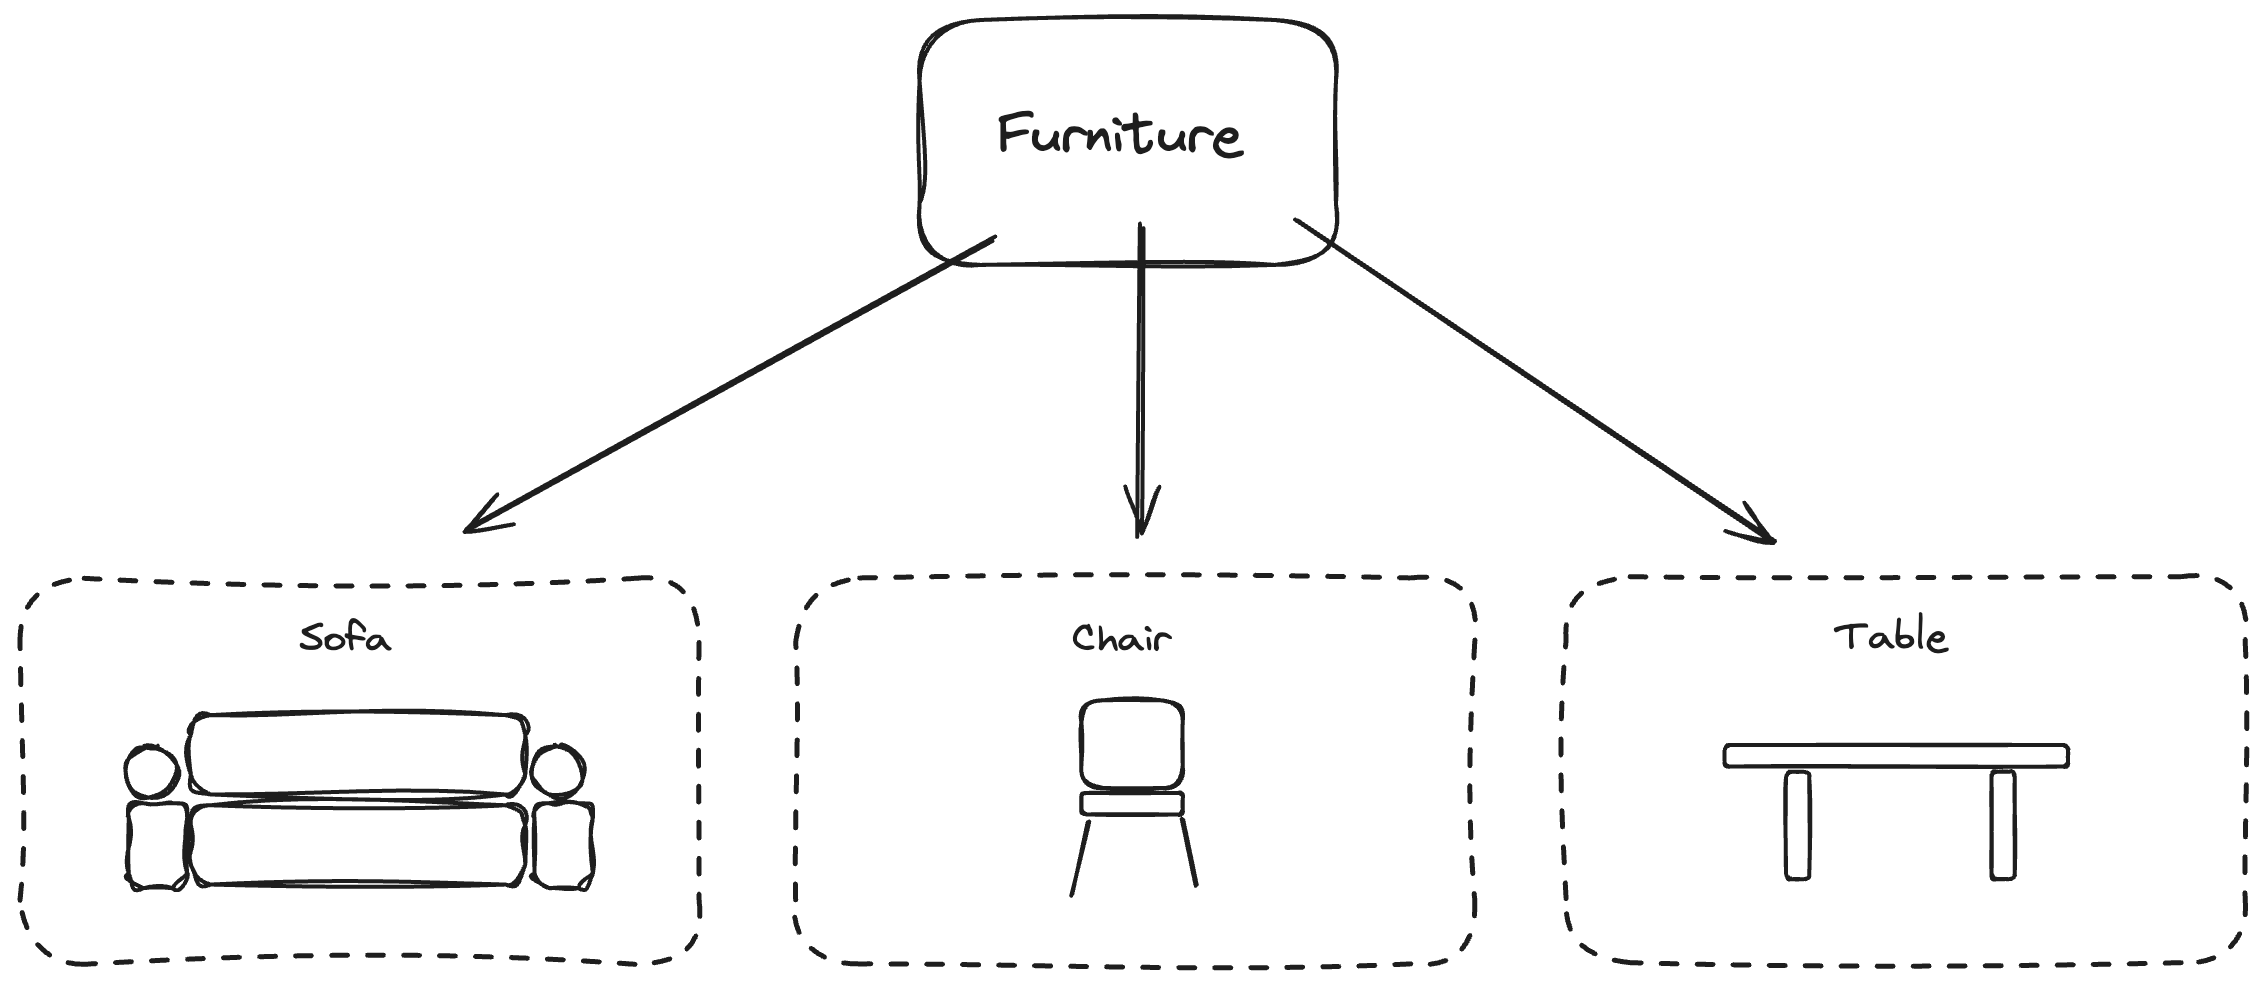 STI Illustration using Furniture as an example